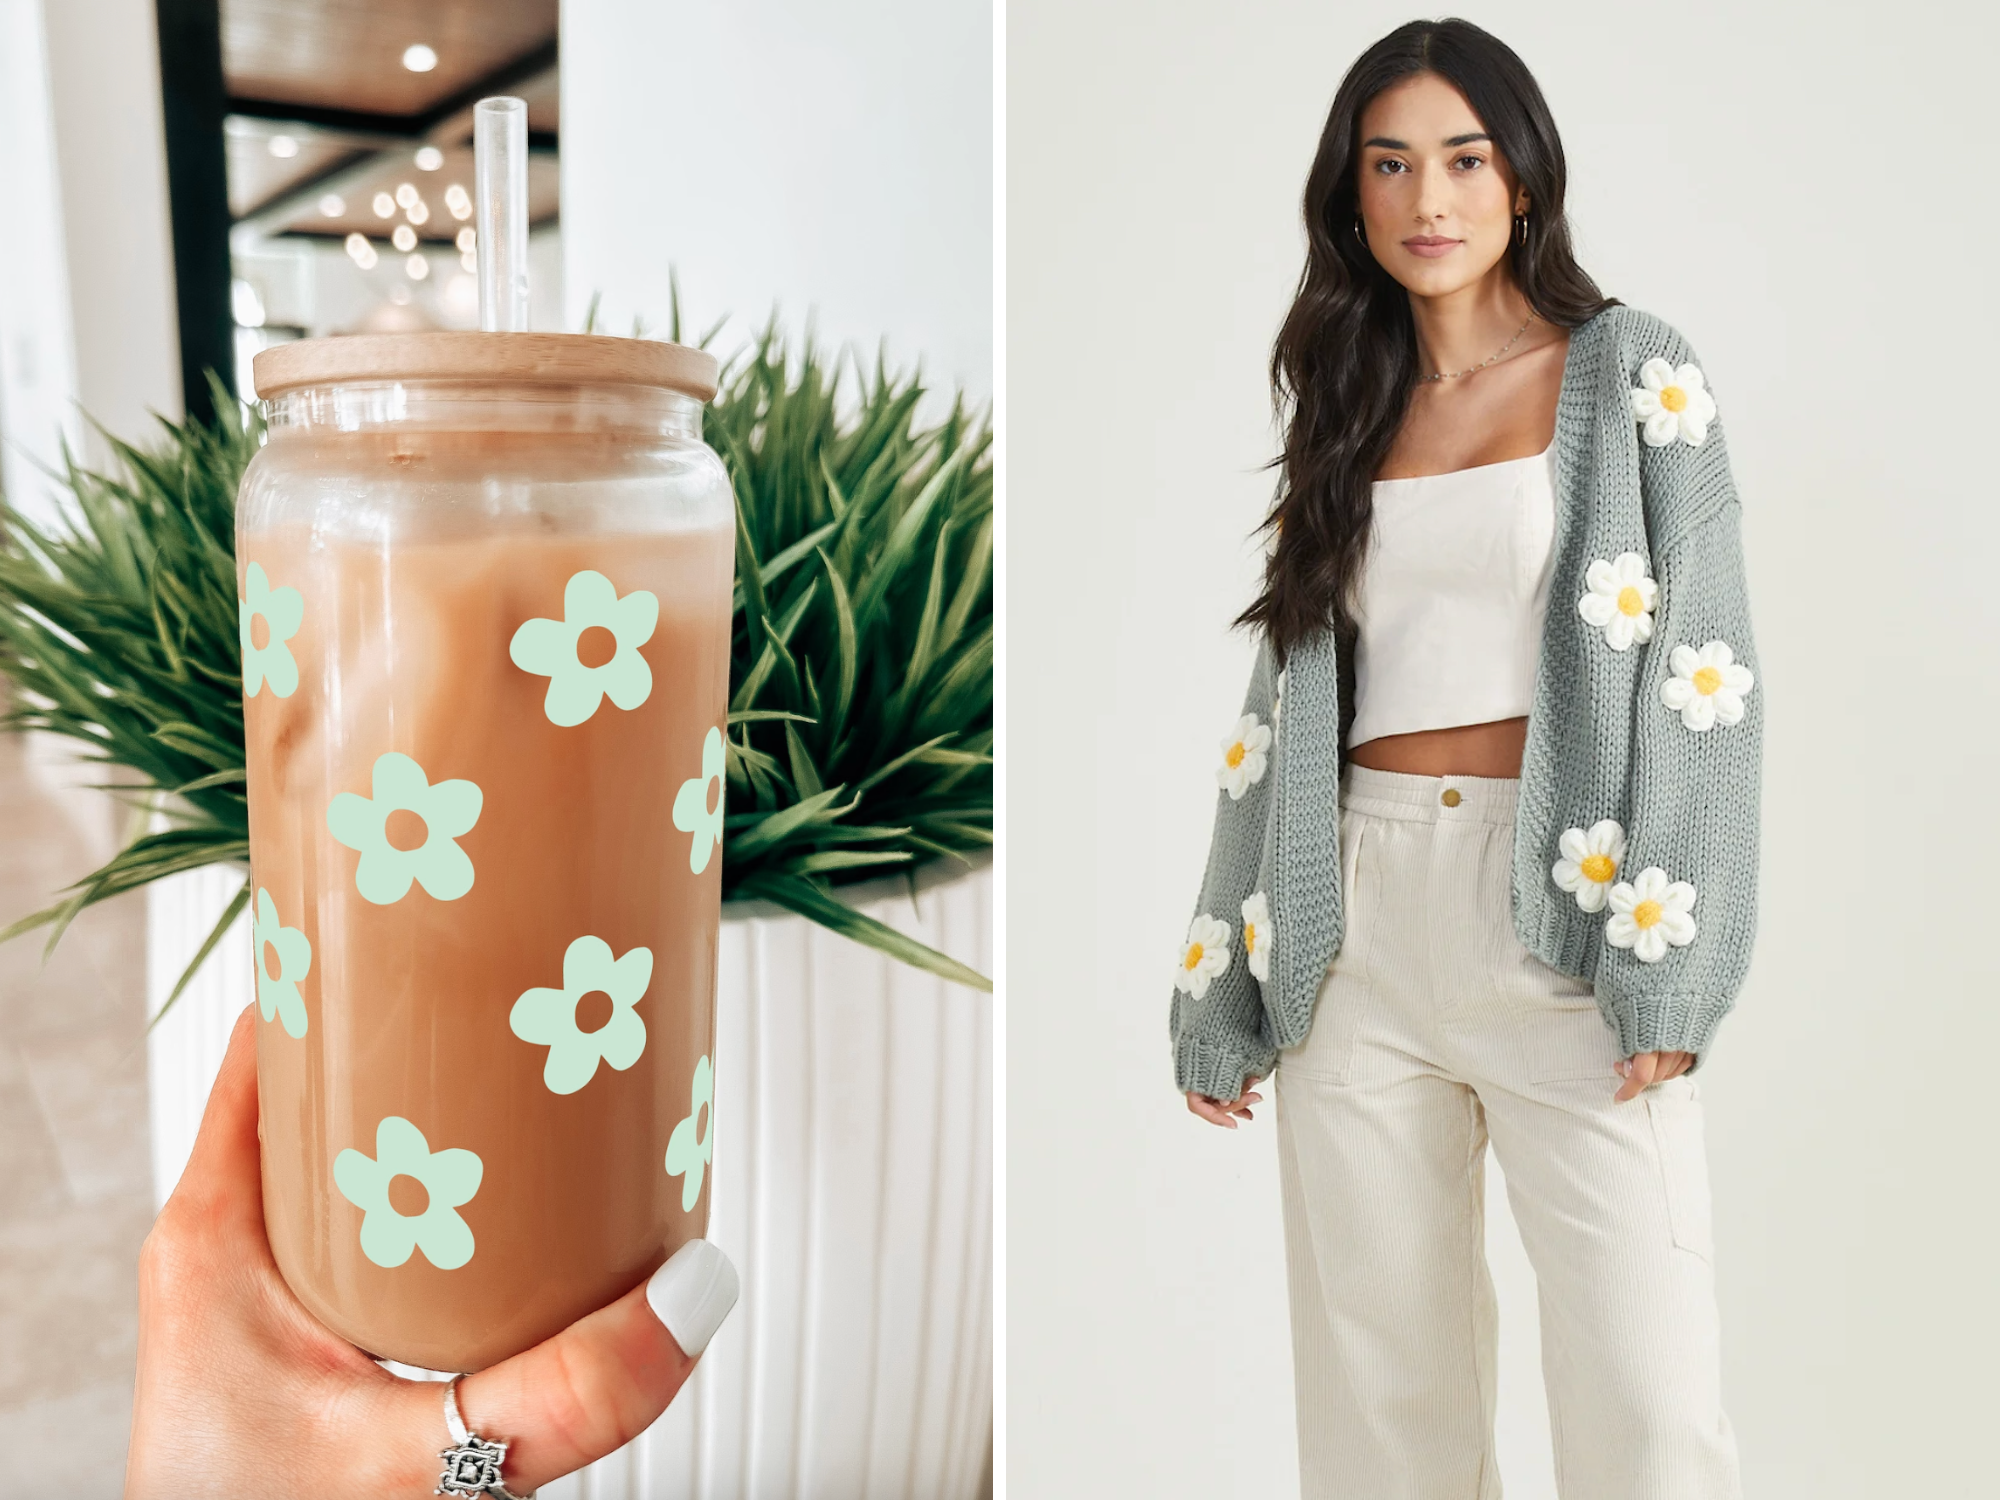 Daisy themed birthday and anniversary gift ideas including a cup and cardigan